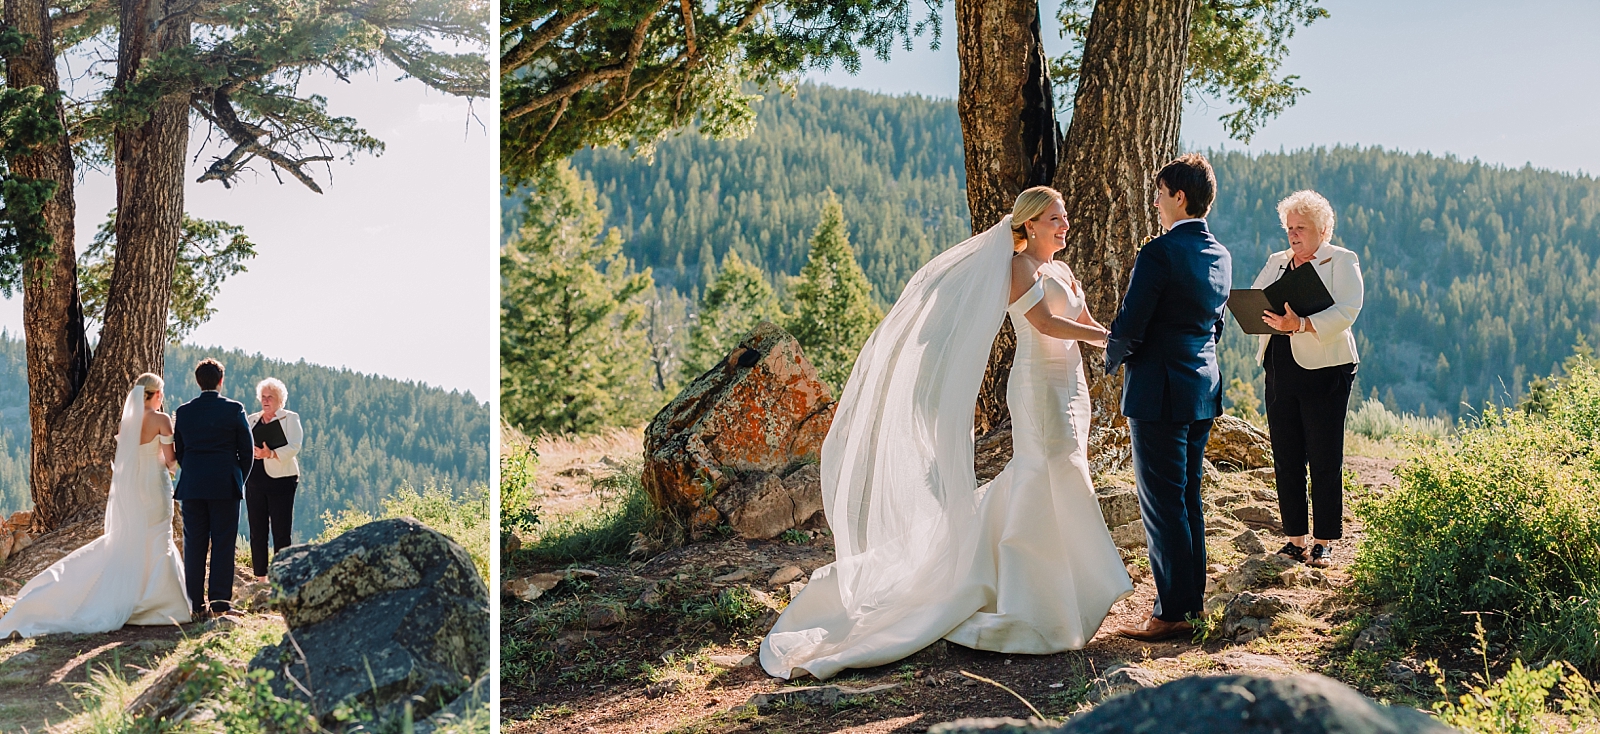 wedding ceremony, where to elope in jackson hole wyoming, The wedding tree in bridger-teton national forest